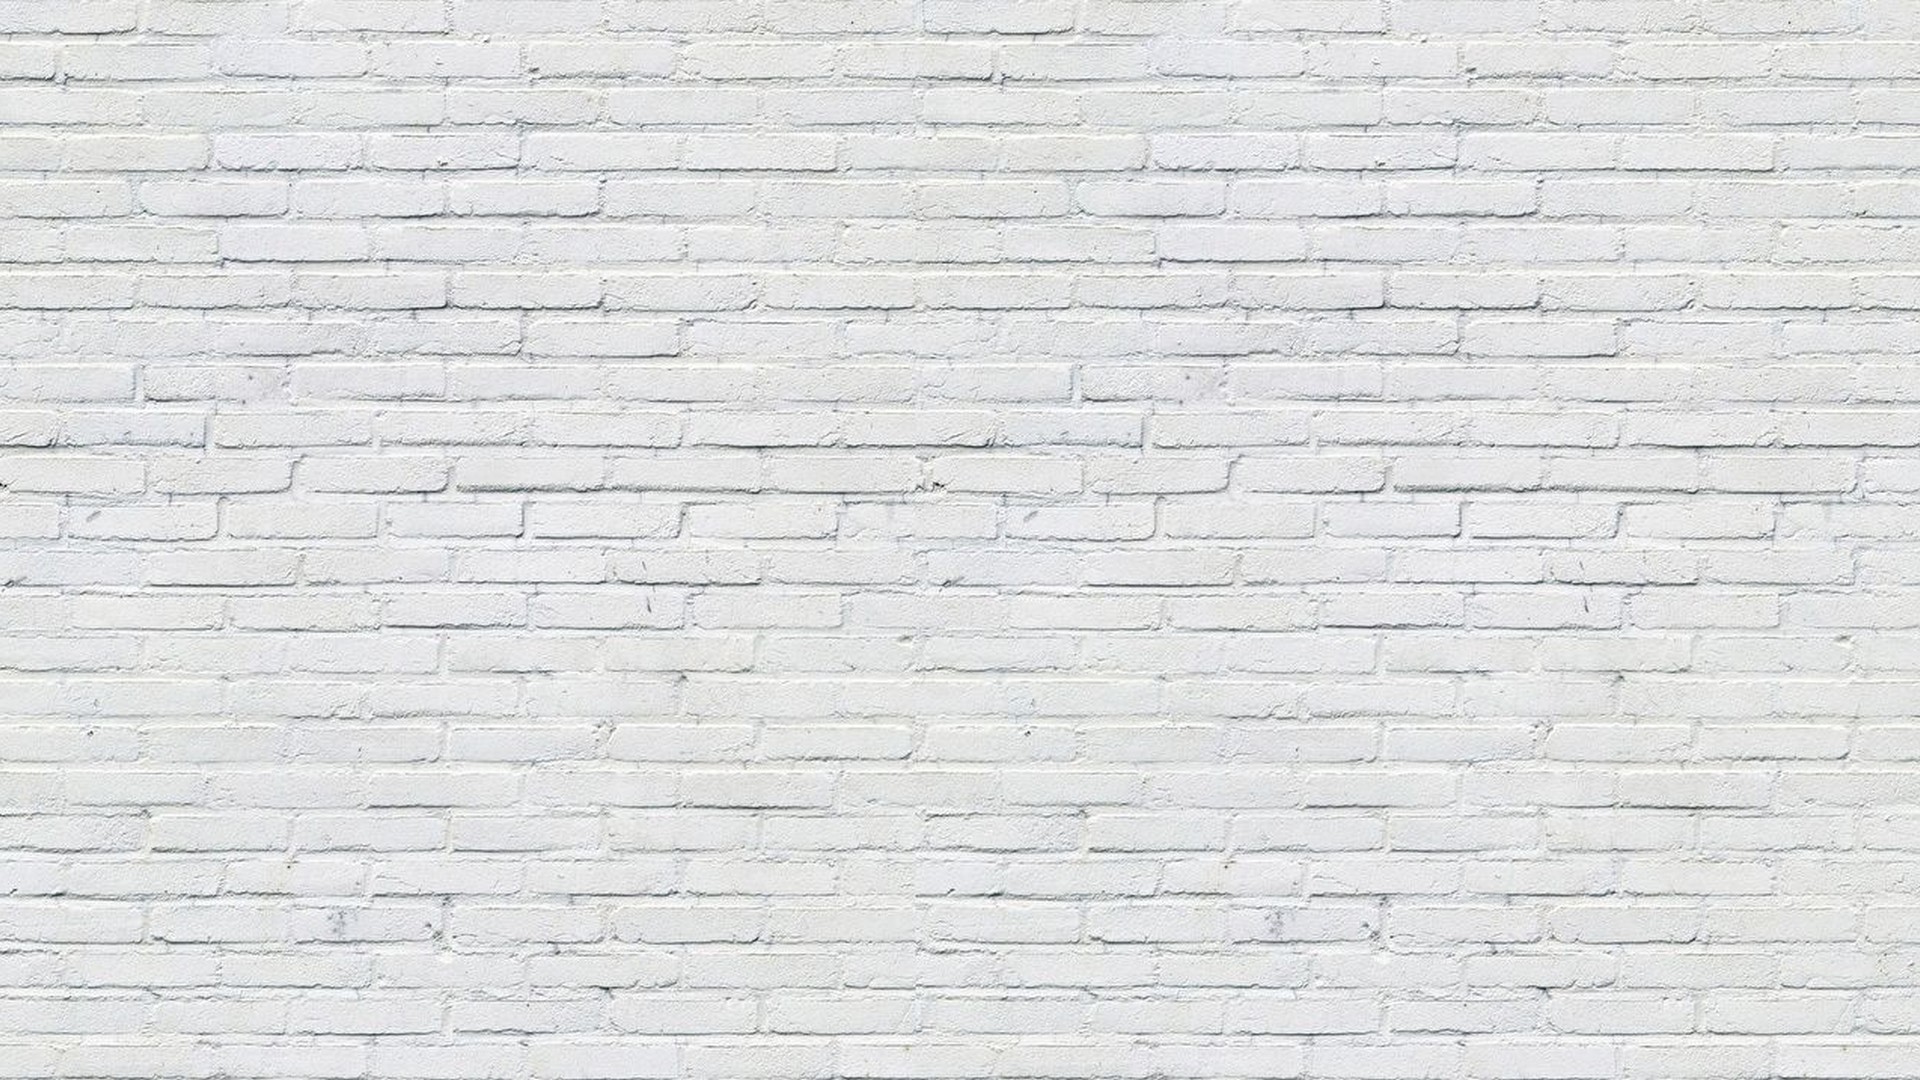 Wallpaper Brick Desktop with high-resolution 1920x1080 pixel. You can use this wallpaper for your Windows and Mac OS computers as well as your Android and iPhone smartphones